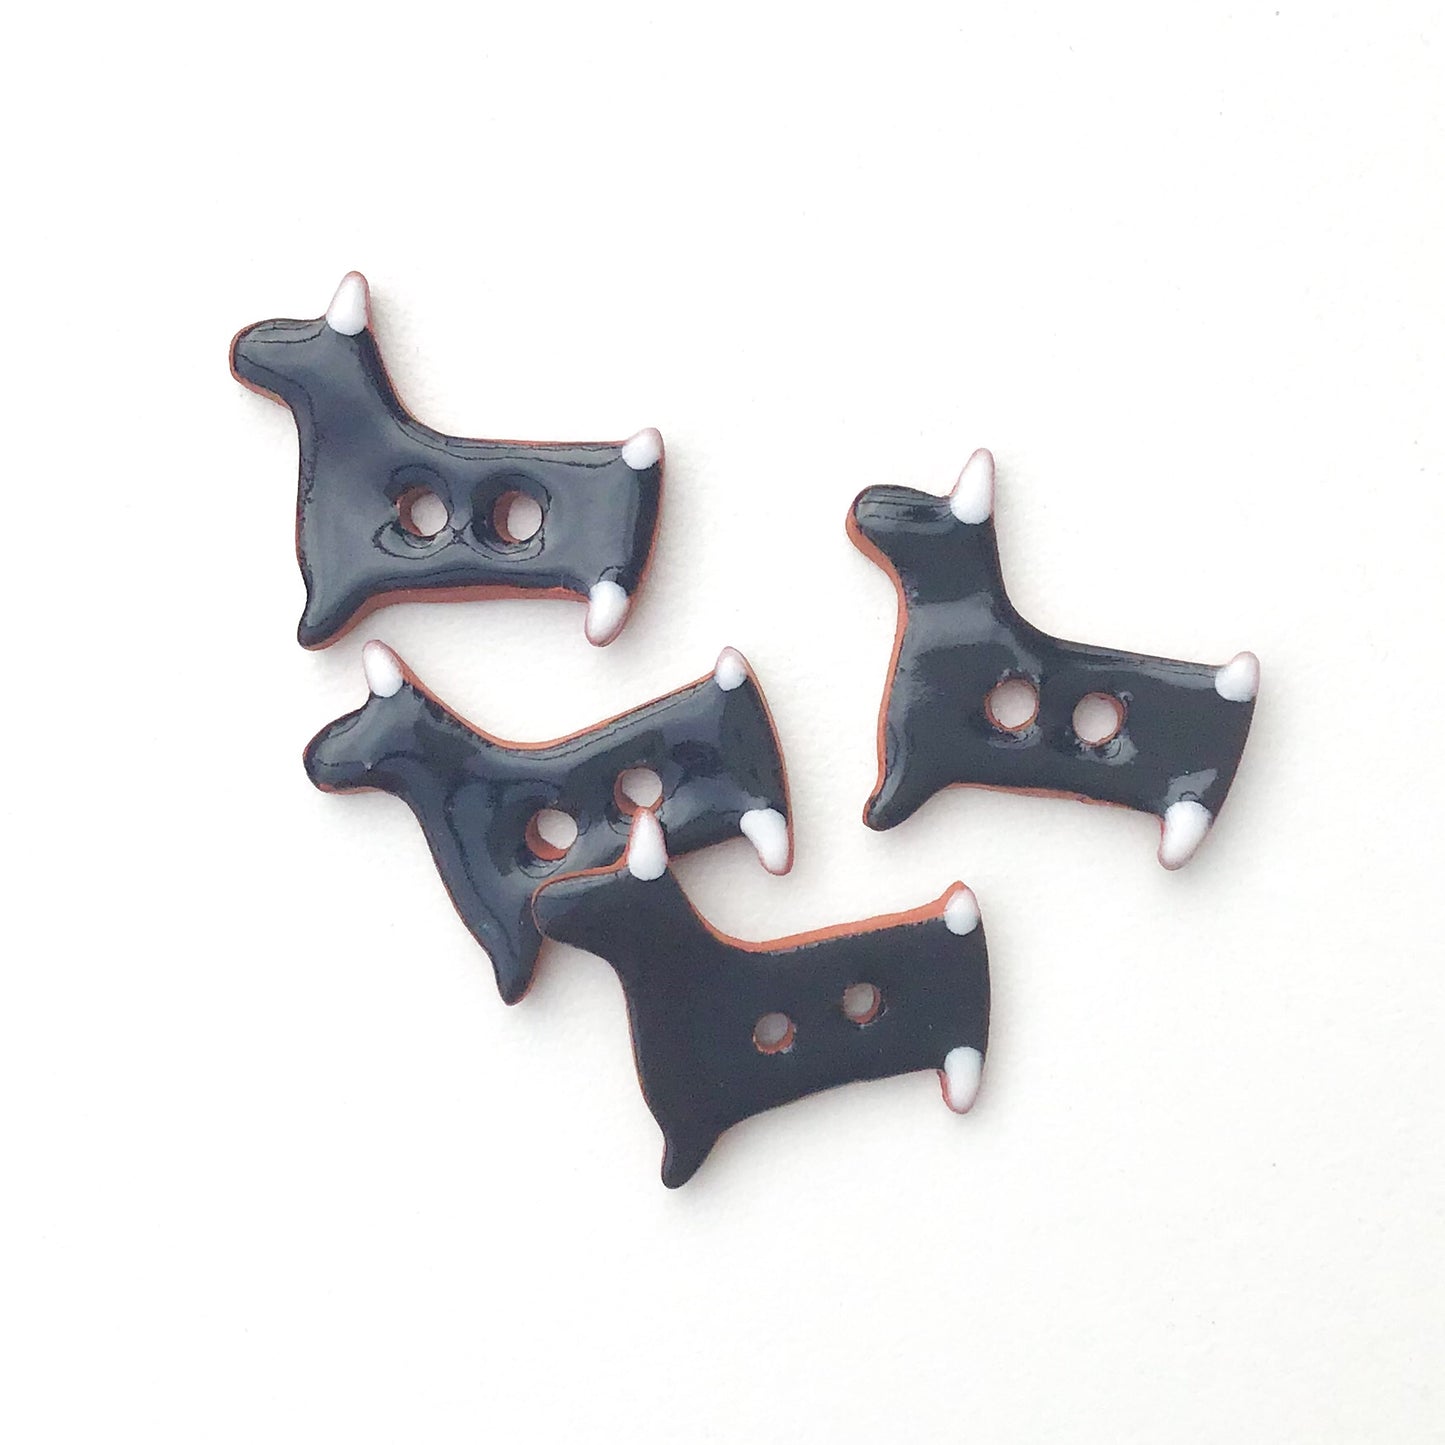 Terrier Dog Buttons - Ceramic Dog Buttons - 5/8" x 3/4" (ws-144)